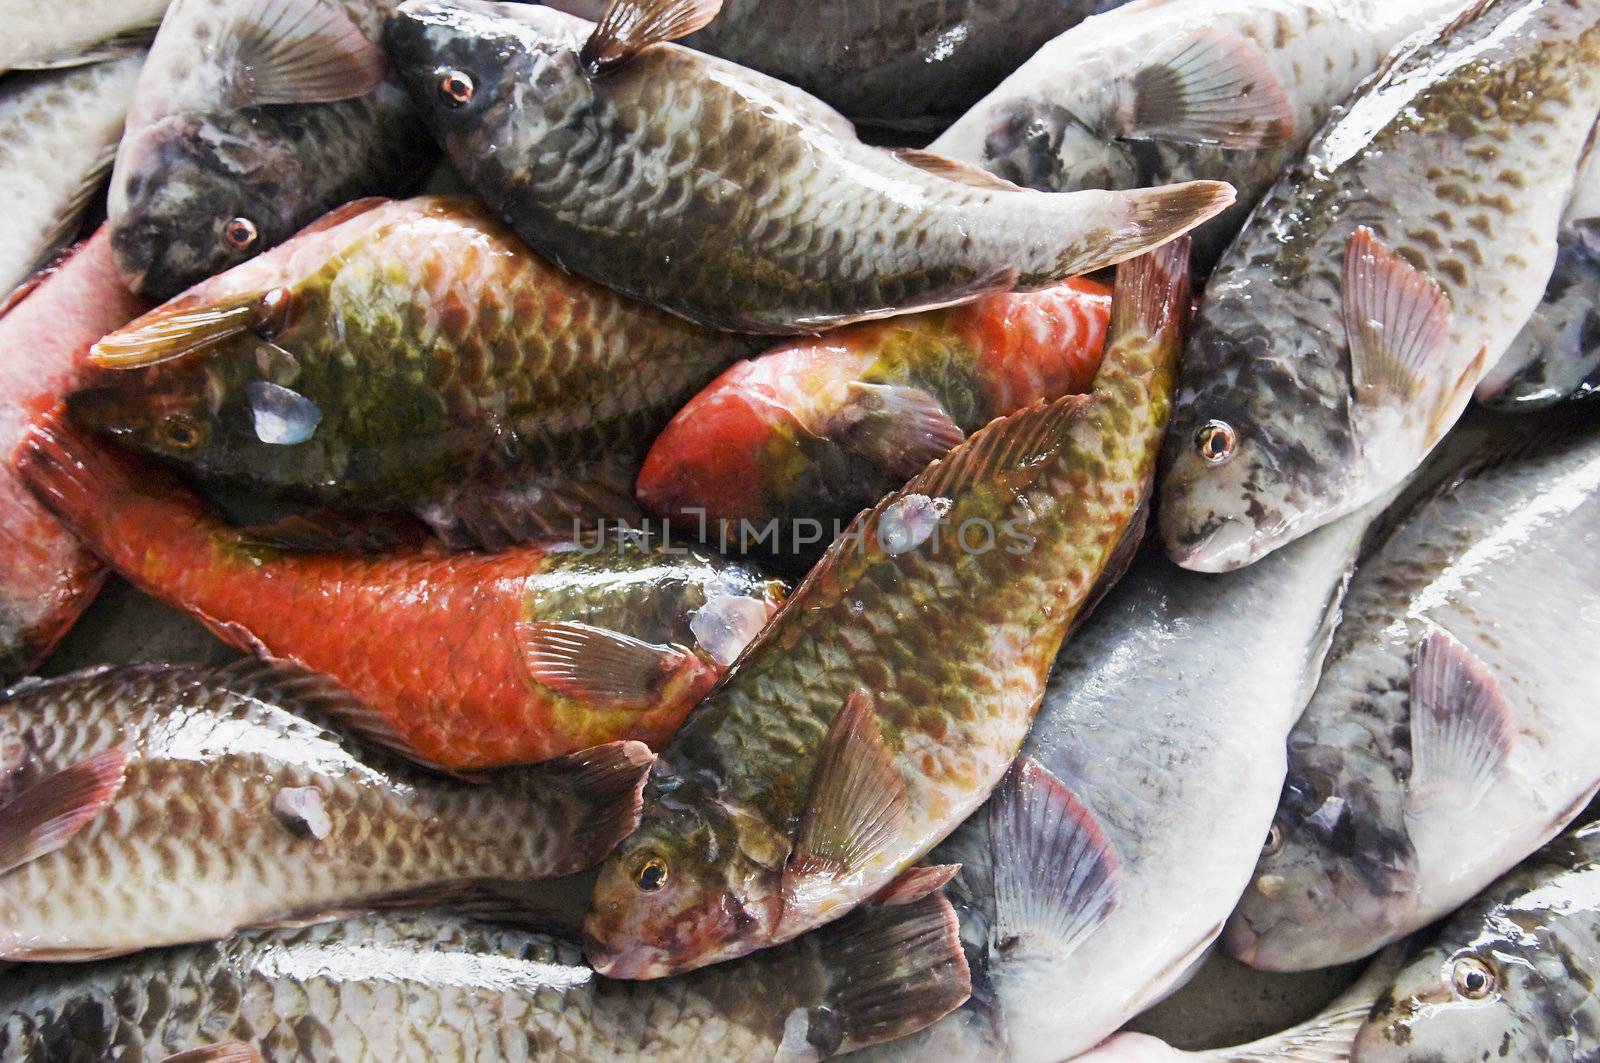 Parrotfish ready for sale at the market, Pico Island, Azores, Portugal